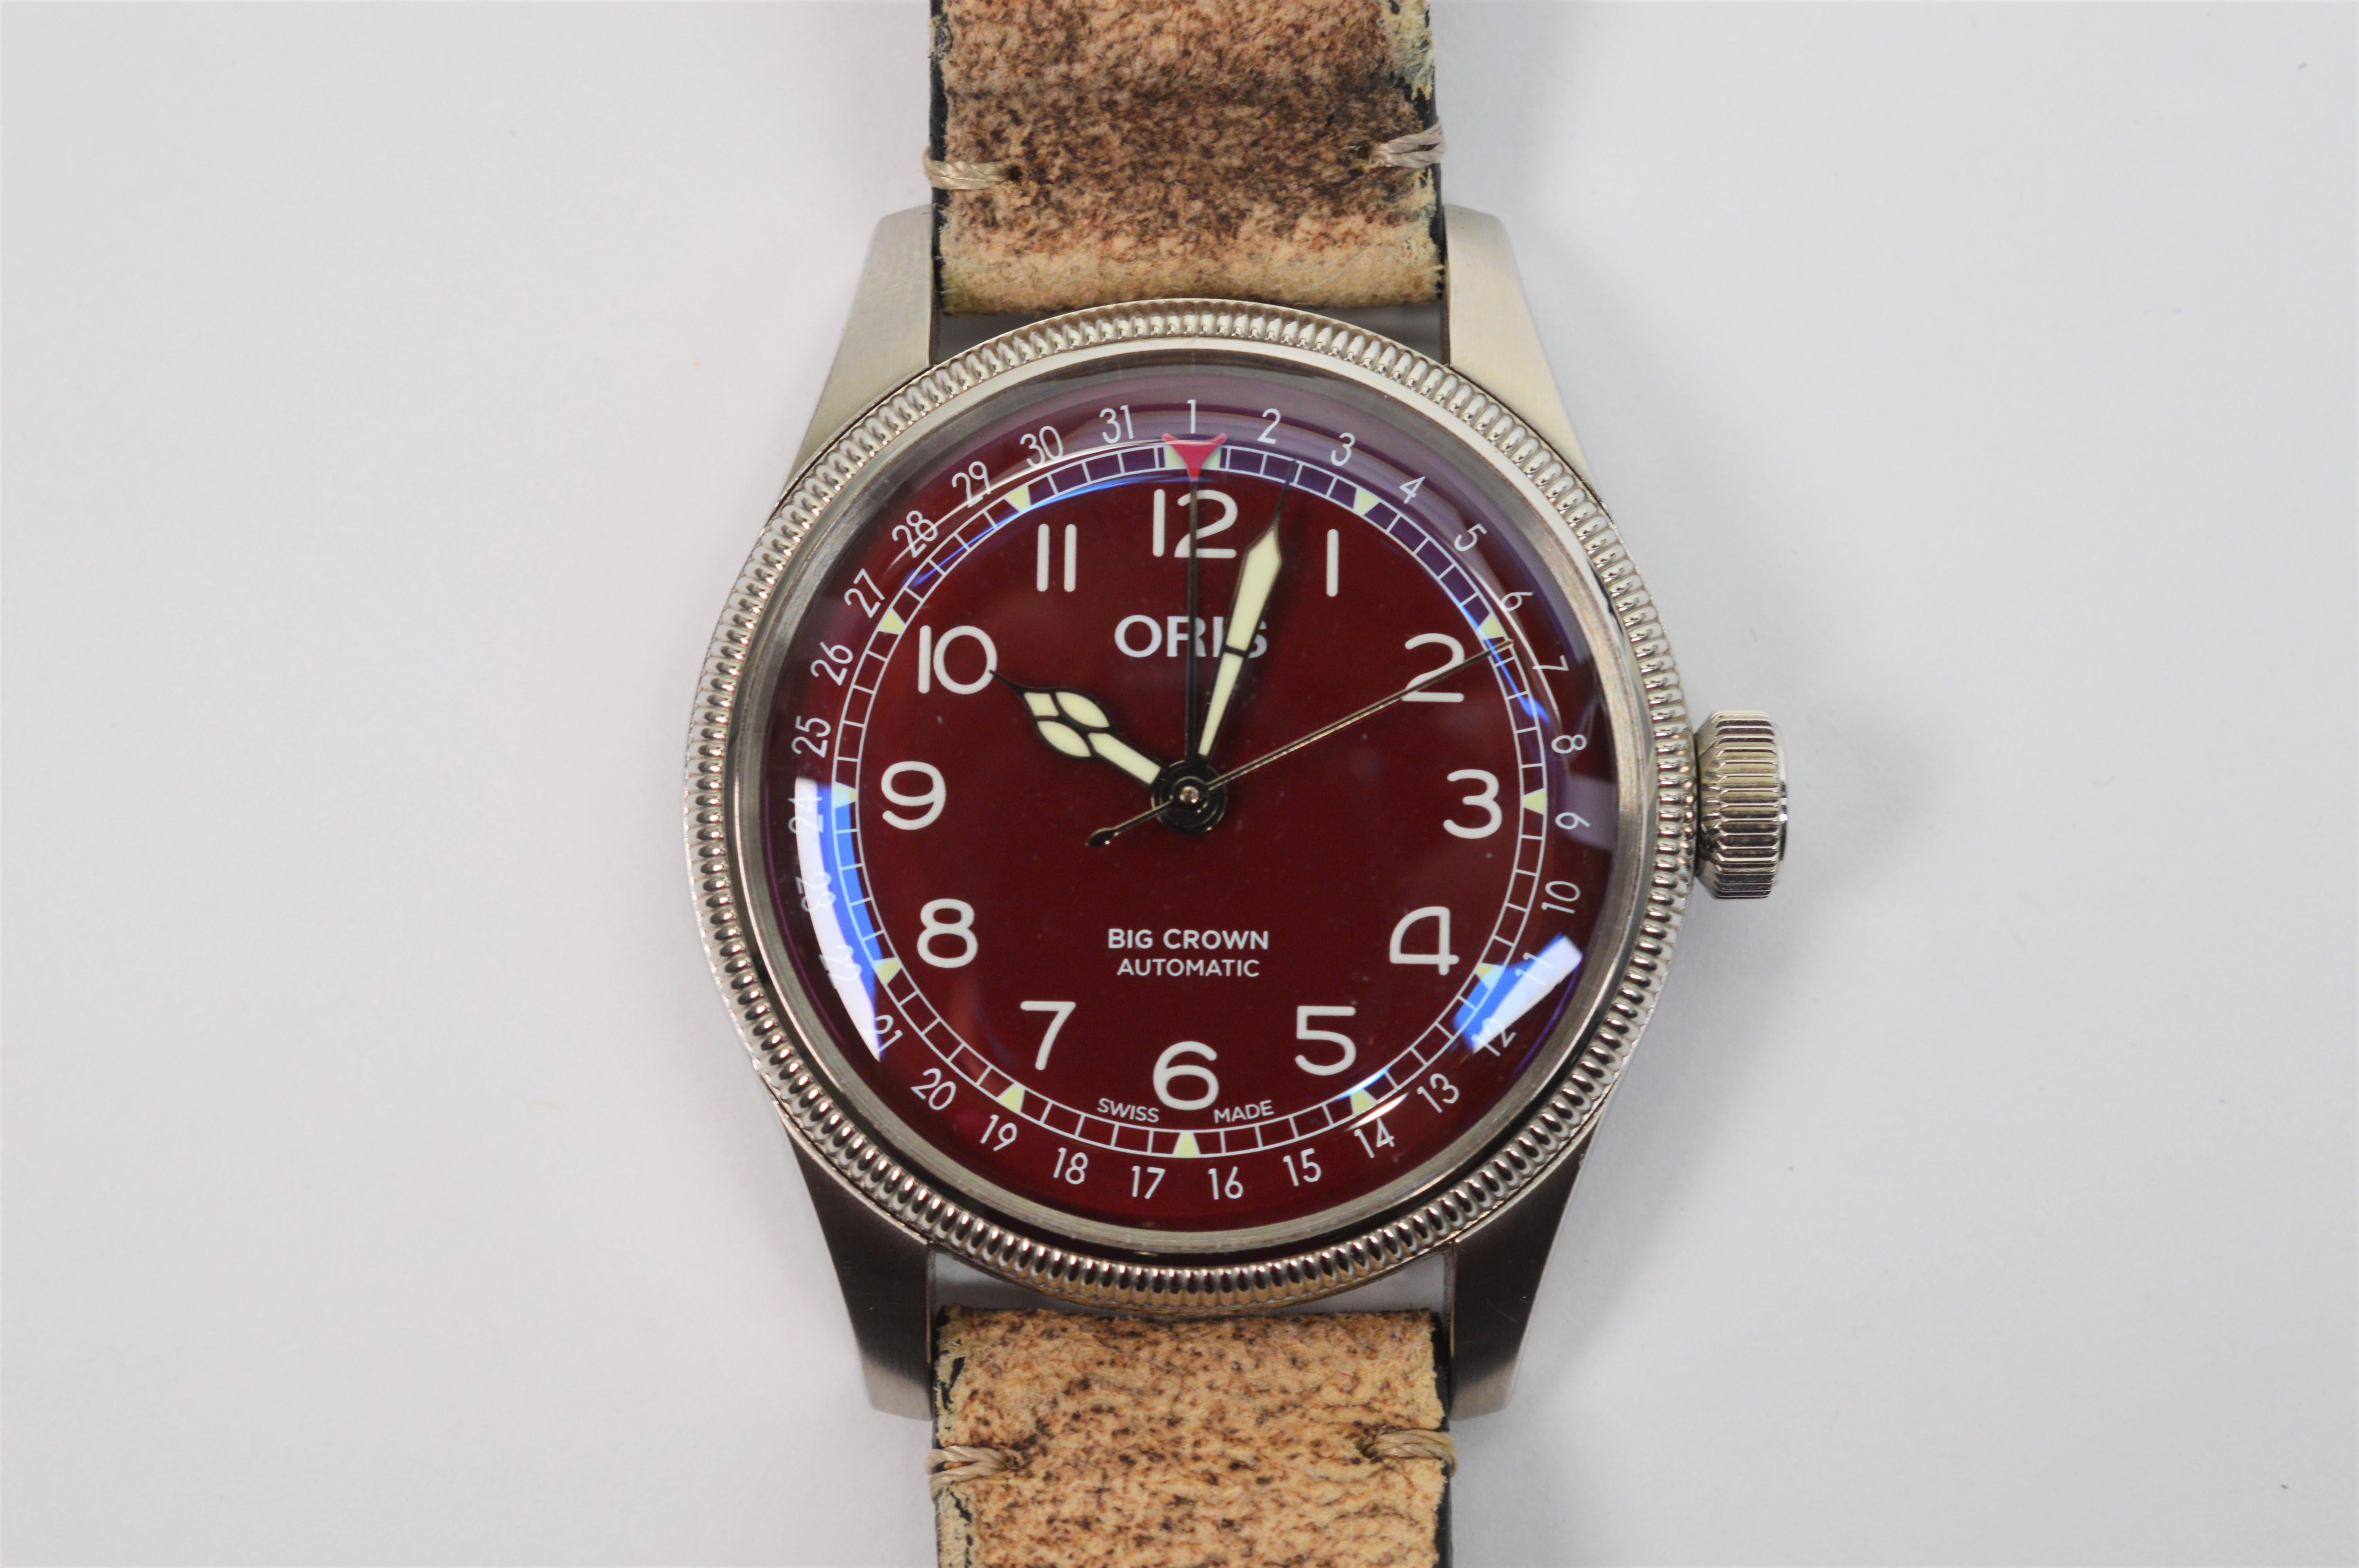 Add this impressive modern Swiss made Men's wrist watch by respected luxury mechanical watch makers, Oris Watch Co. (established in Holstein 1904) to your collection.  Bold vintage details including the deep red face and distressed leather strap